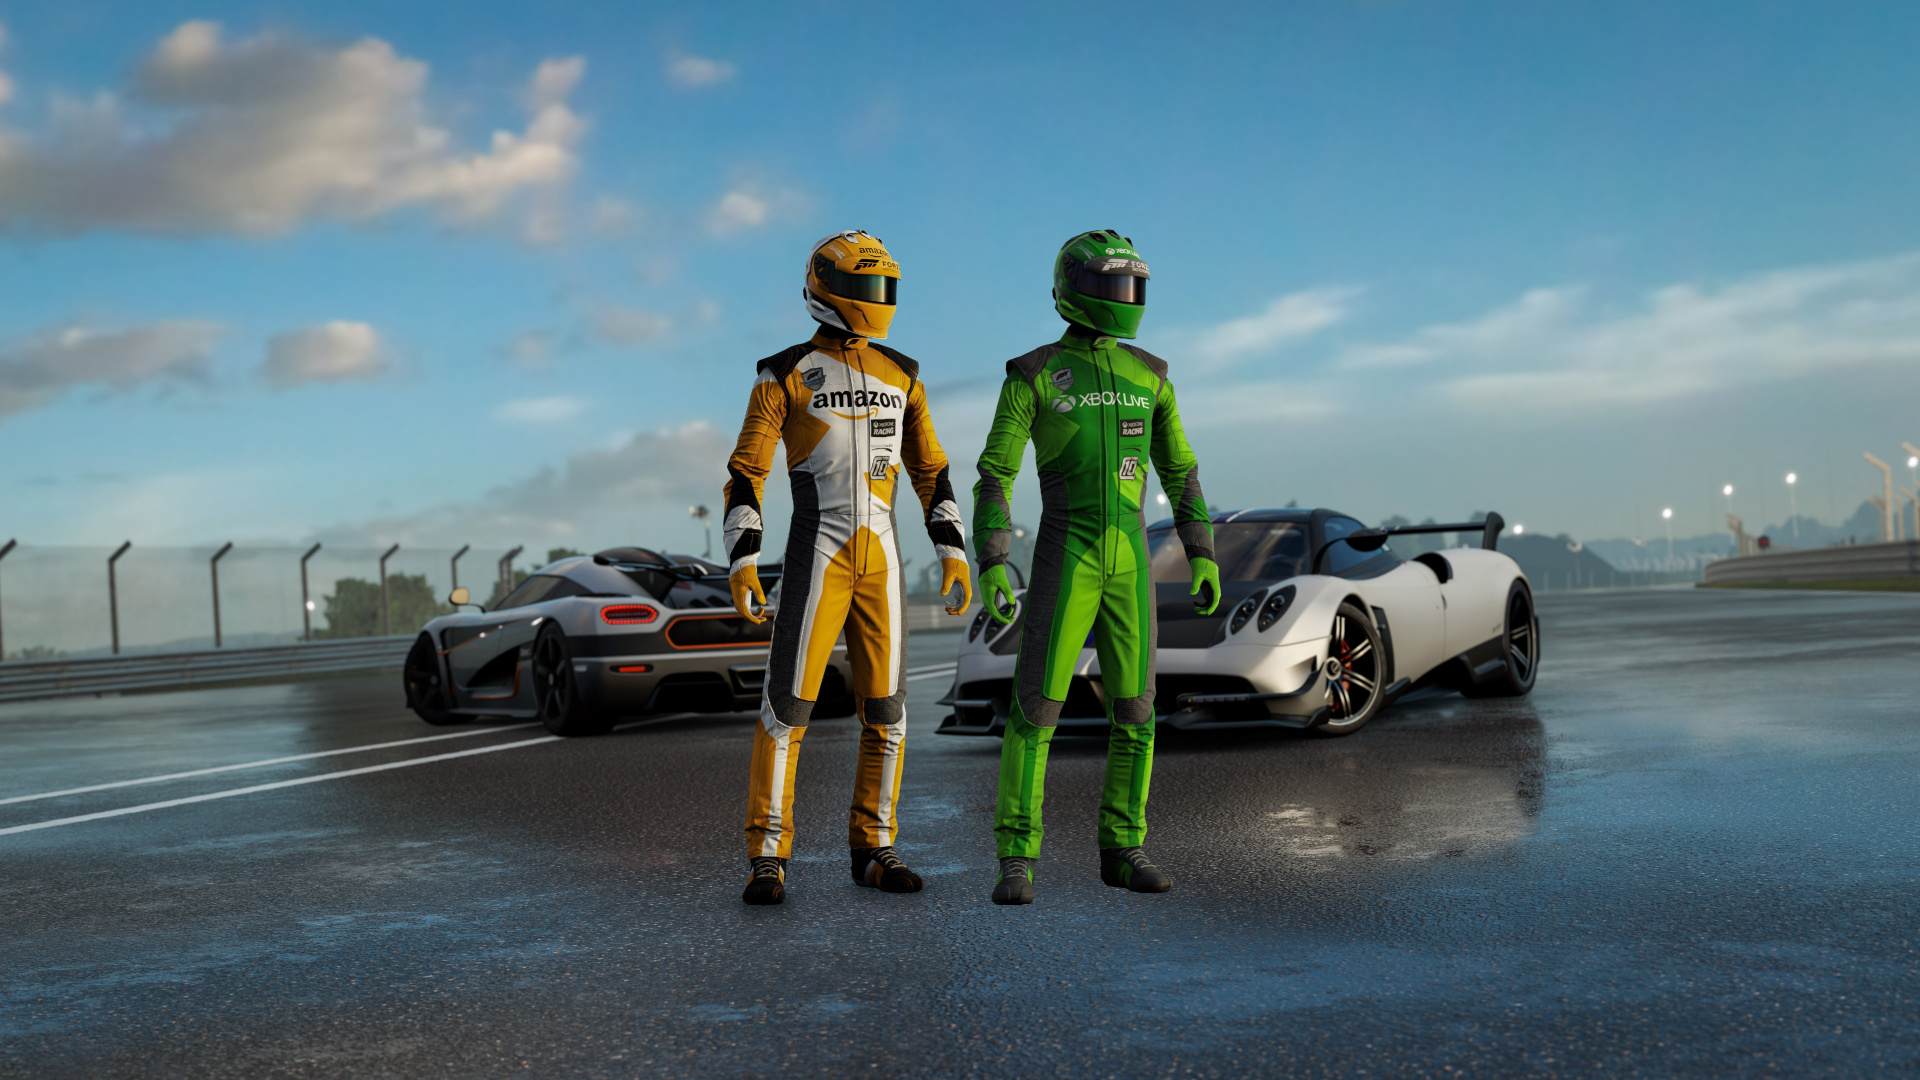 2 Men in Green and Yellow Helmet and Helmet Standing Beside White Sports Car During Daytime. Wallpaper in 1920x1080 Resolution